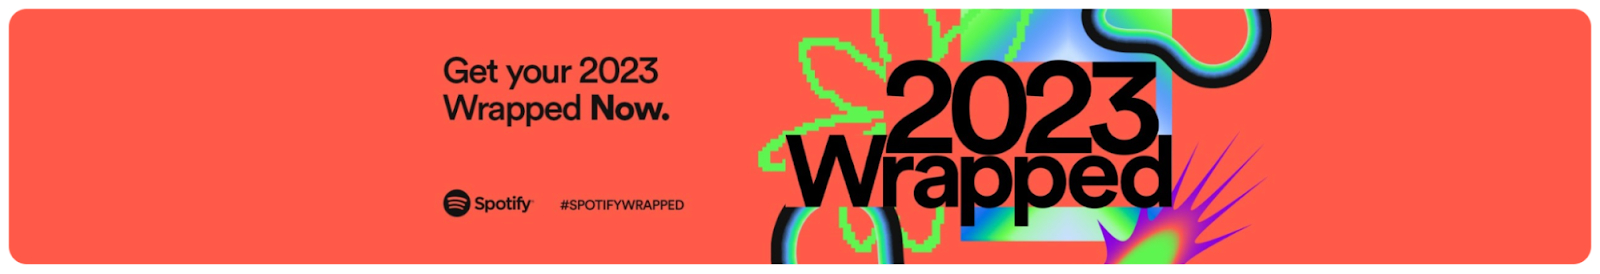 Spotify's YouTube banner that reads "Get your 2023 Wrapped Now."